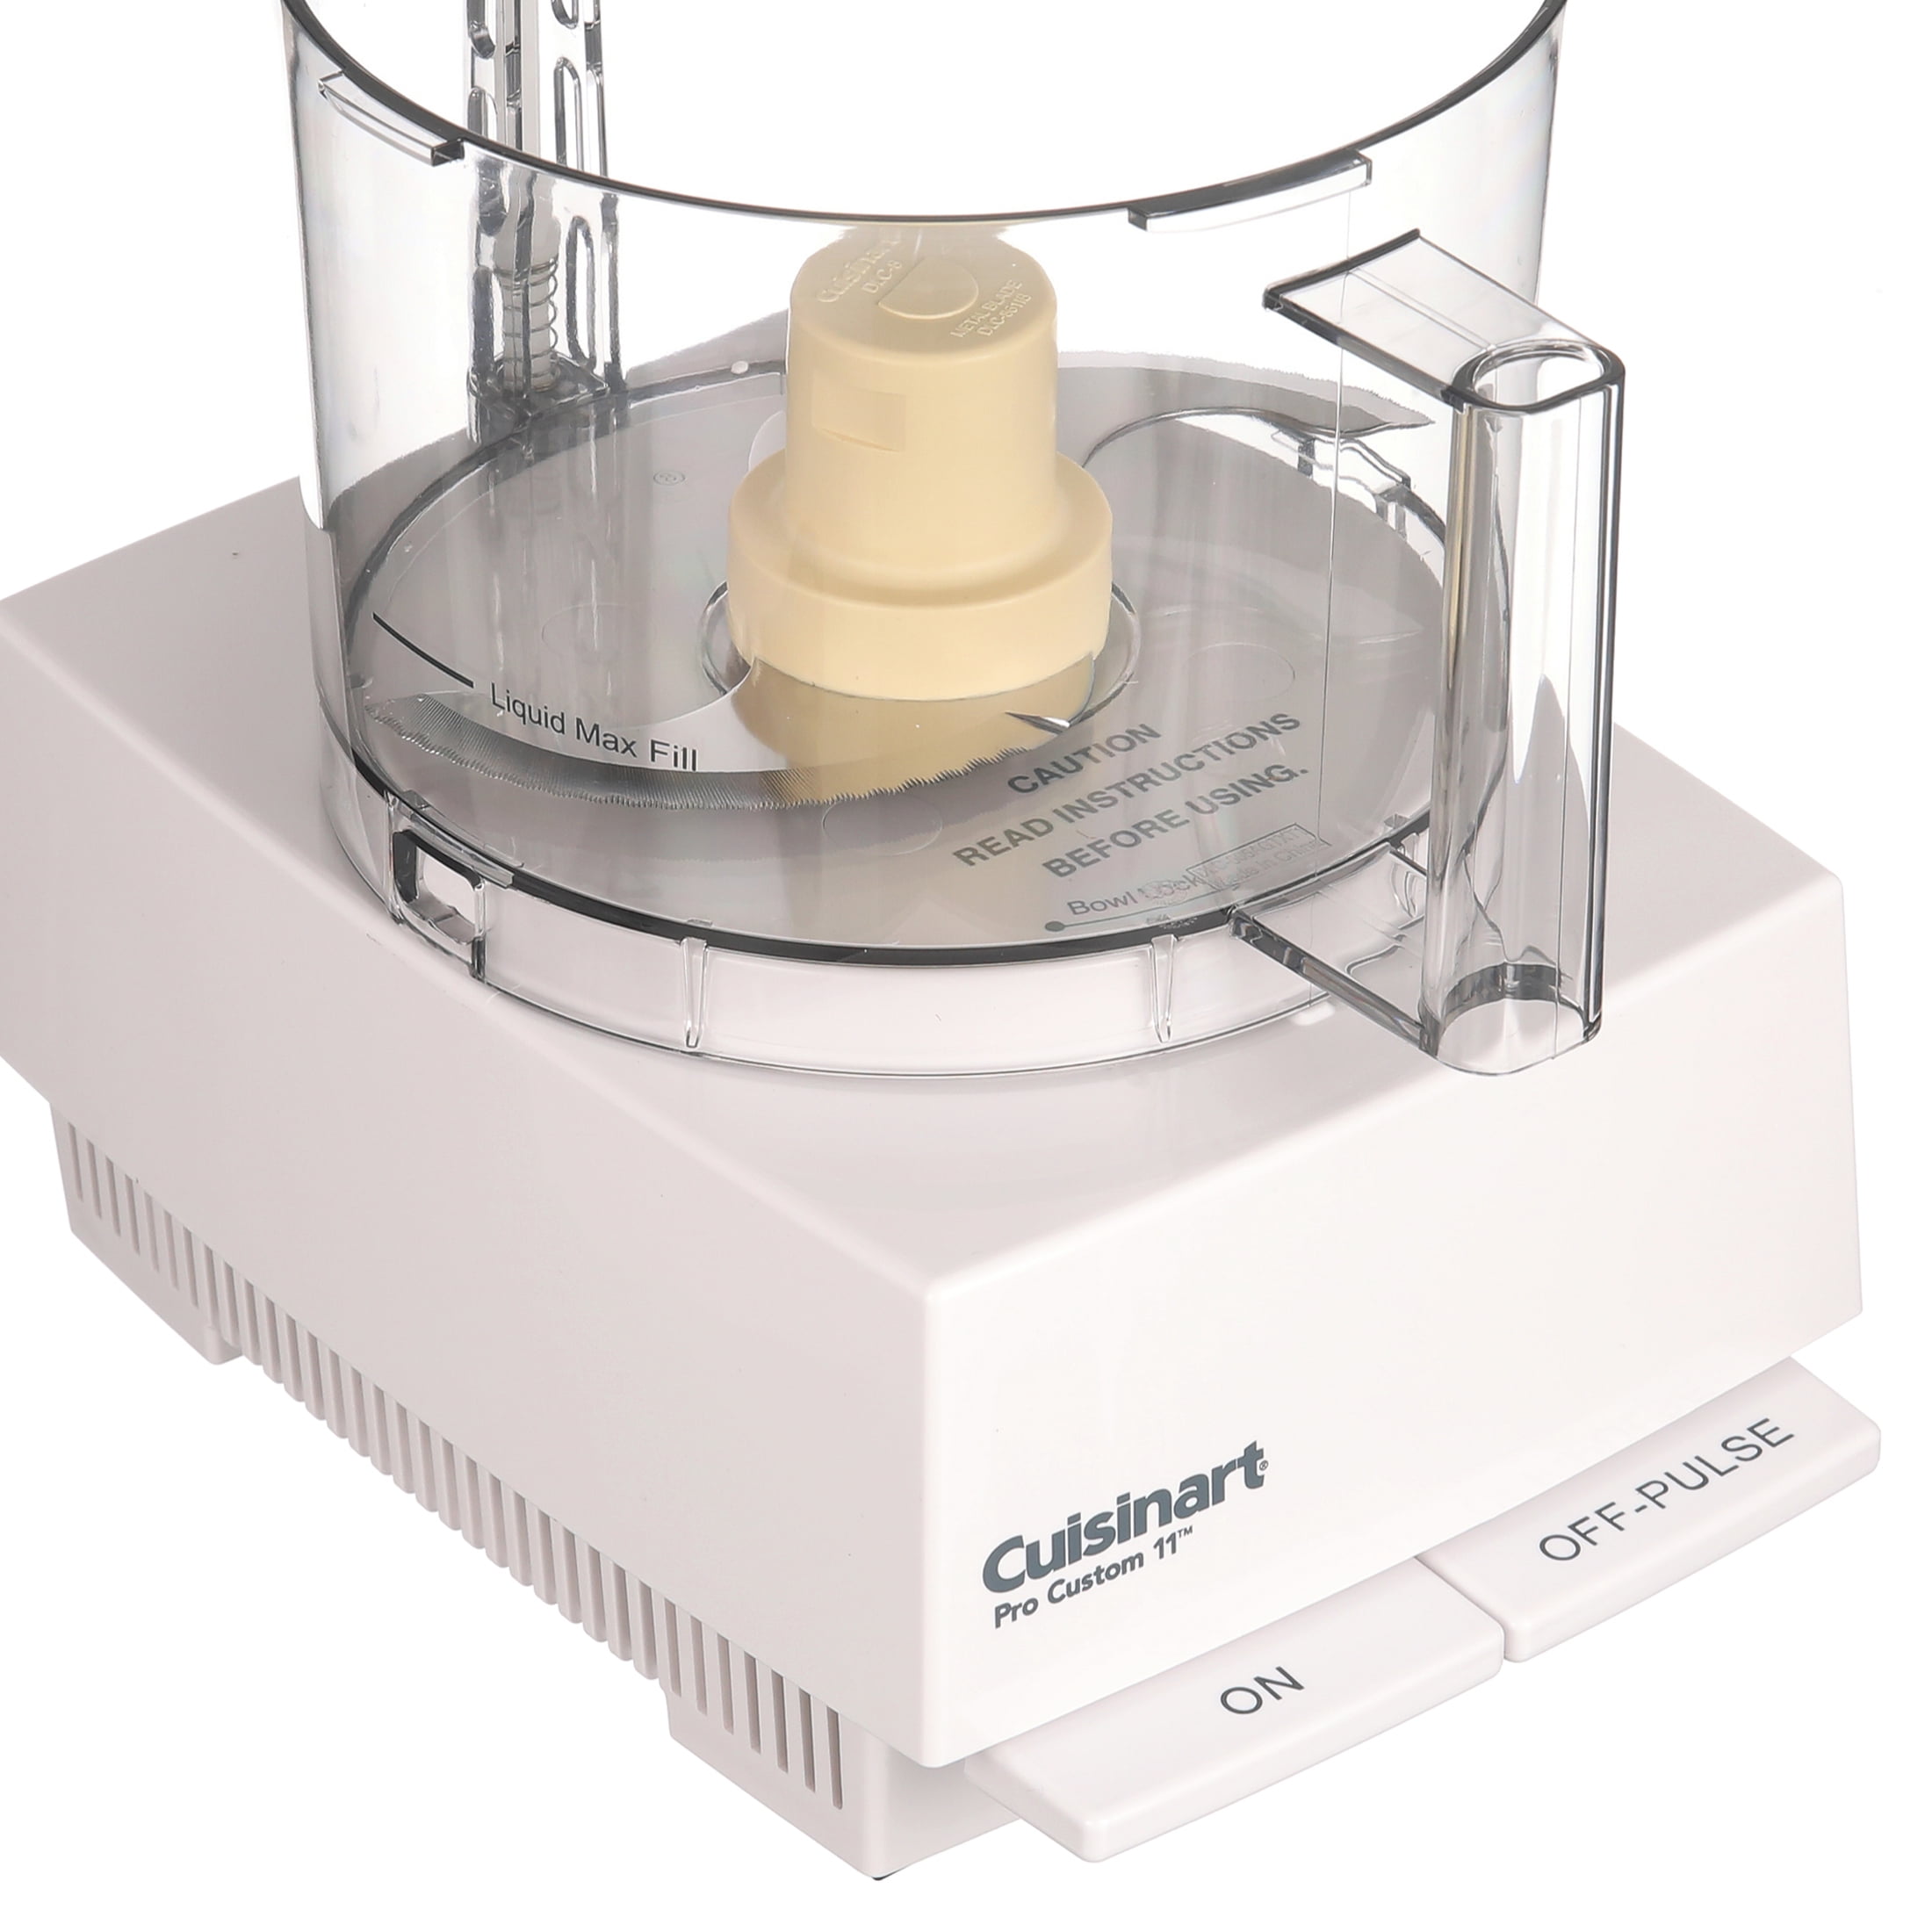 Cuisinart FP-11 White 11-cup Elite Collection Food Processor - Bed Bath &  Beyond - 10908492